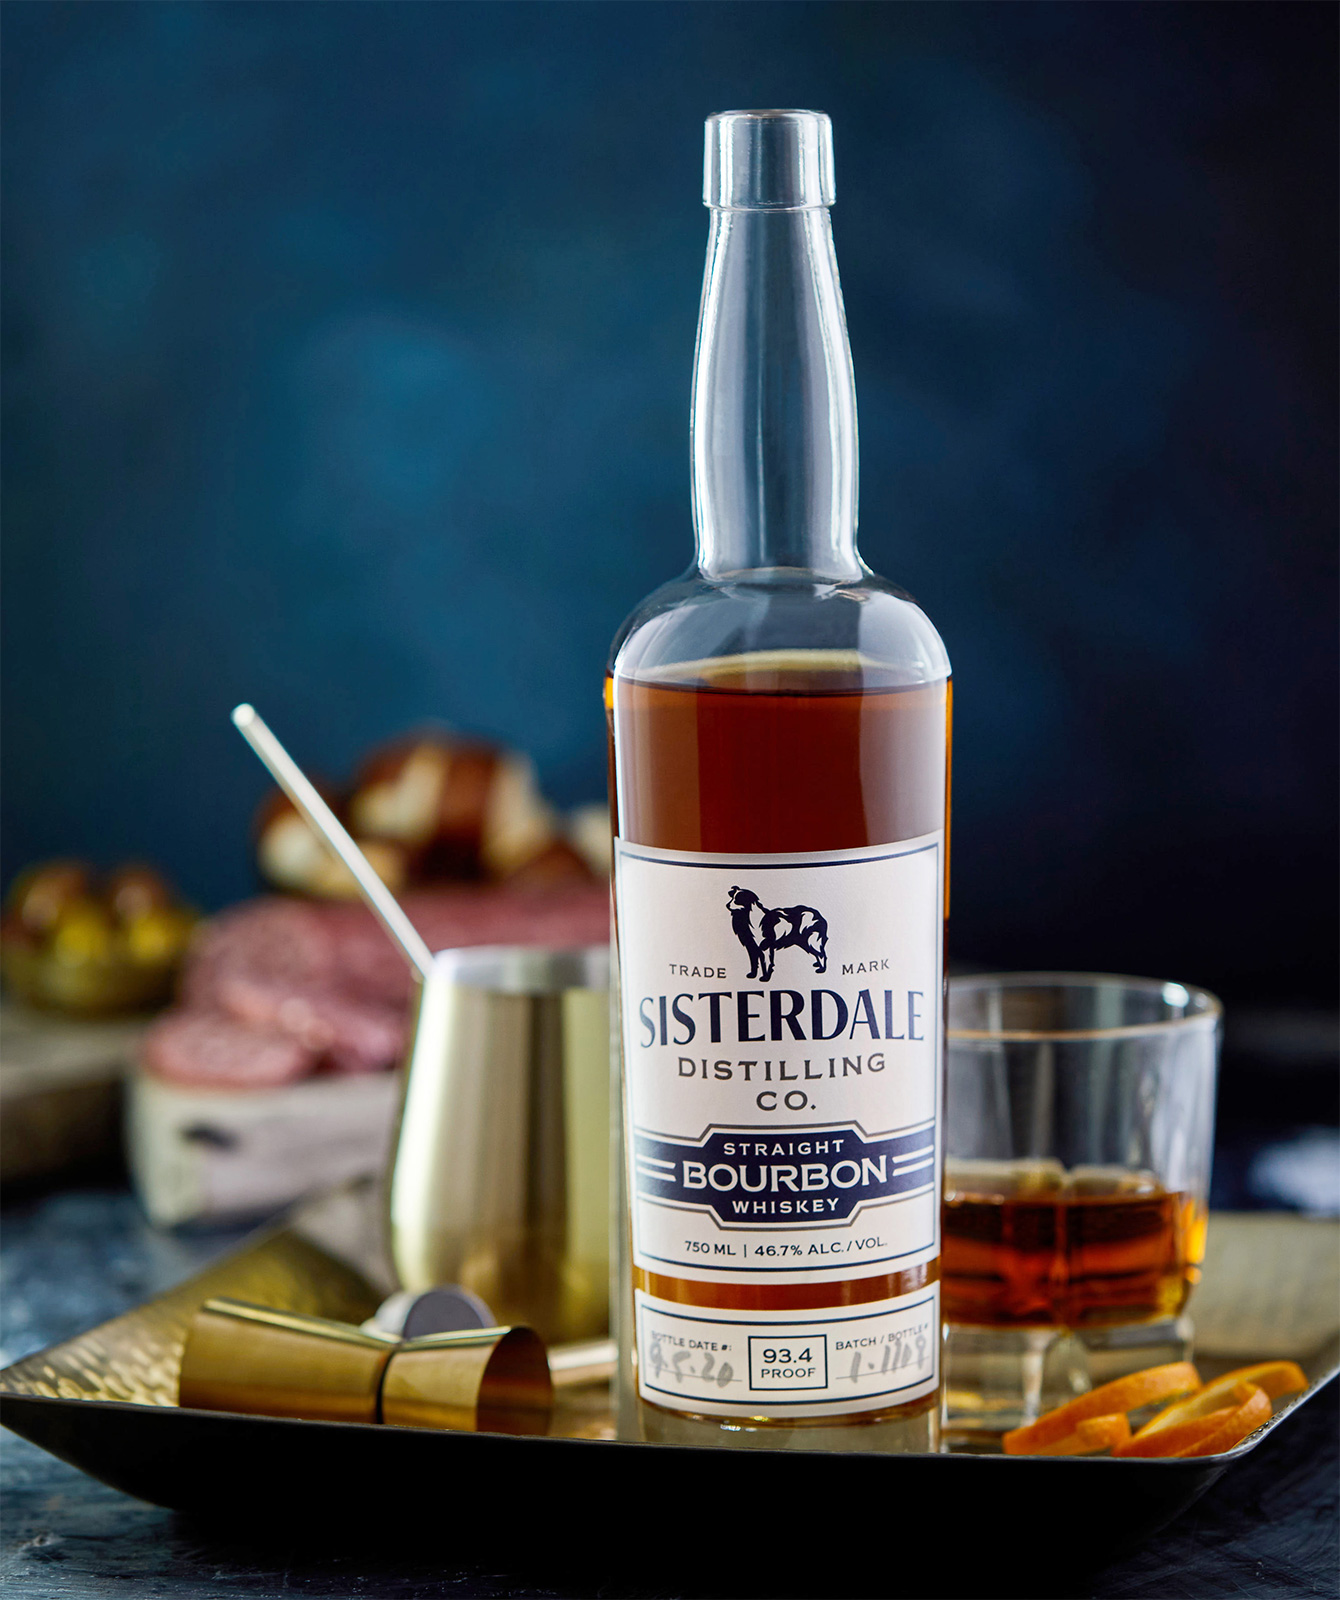 Sisterdale Distilling Co bourbon package design by beau morrow for left hand design in austin texas